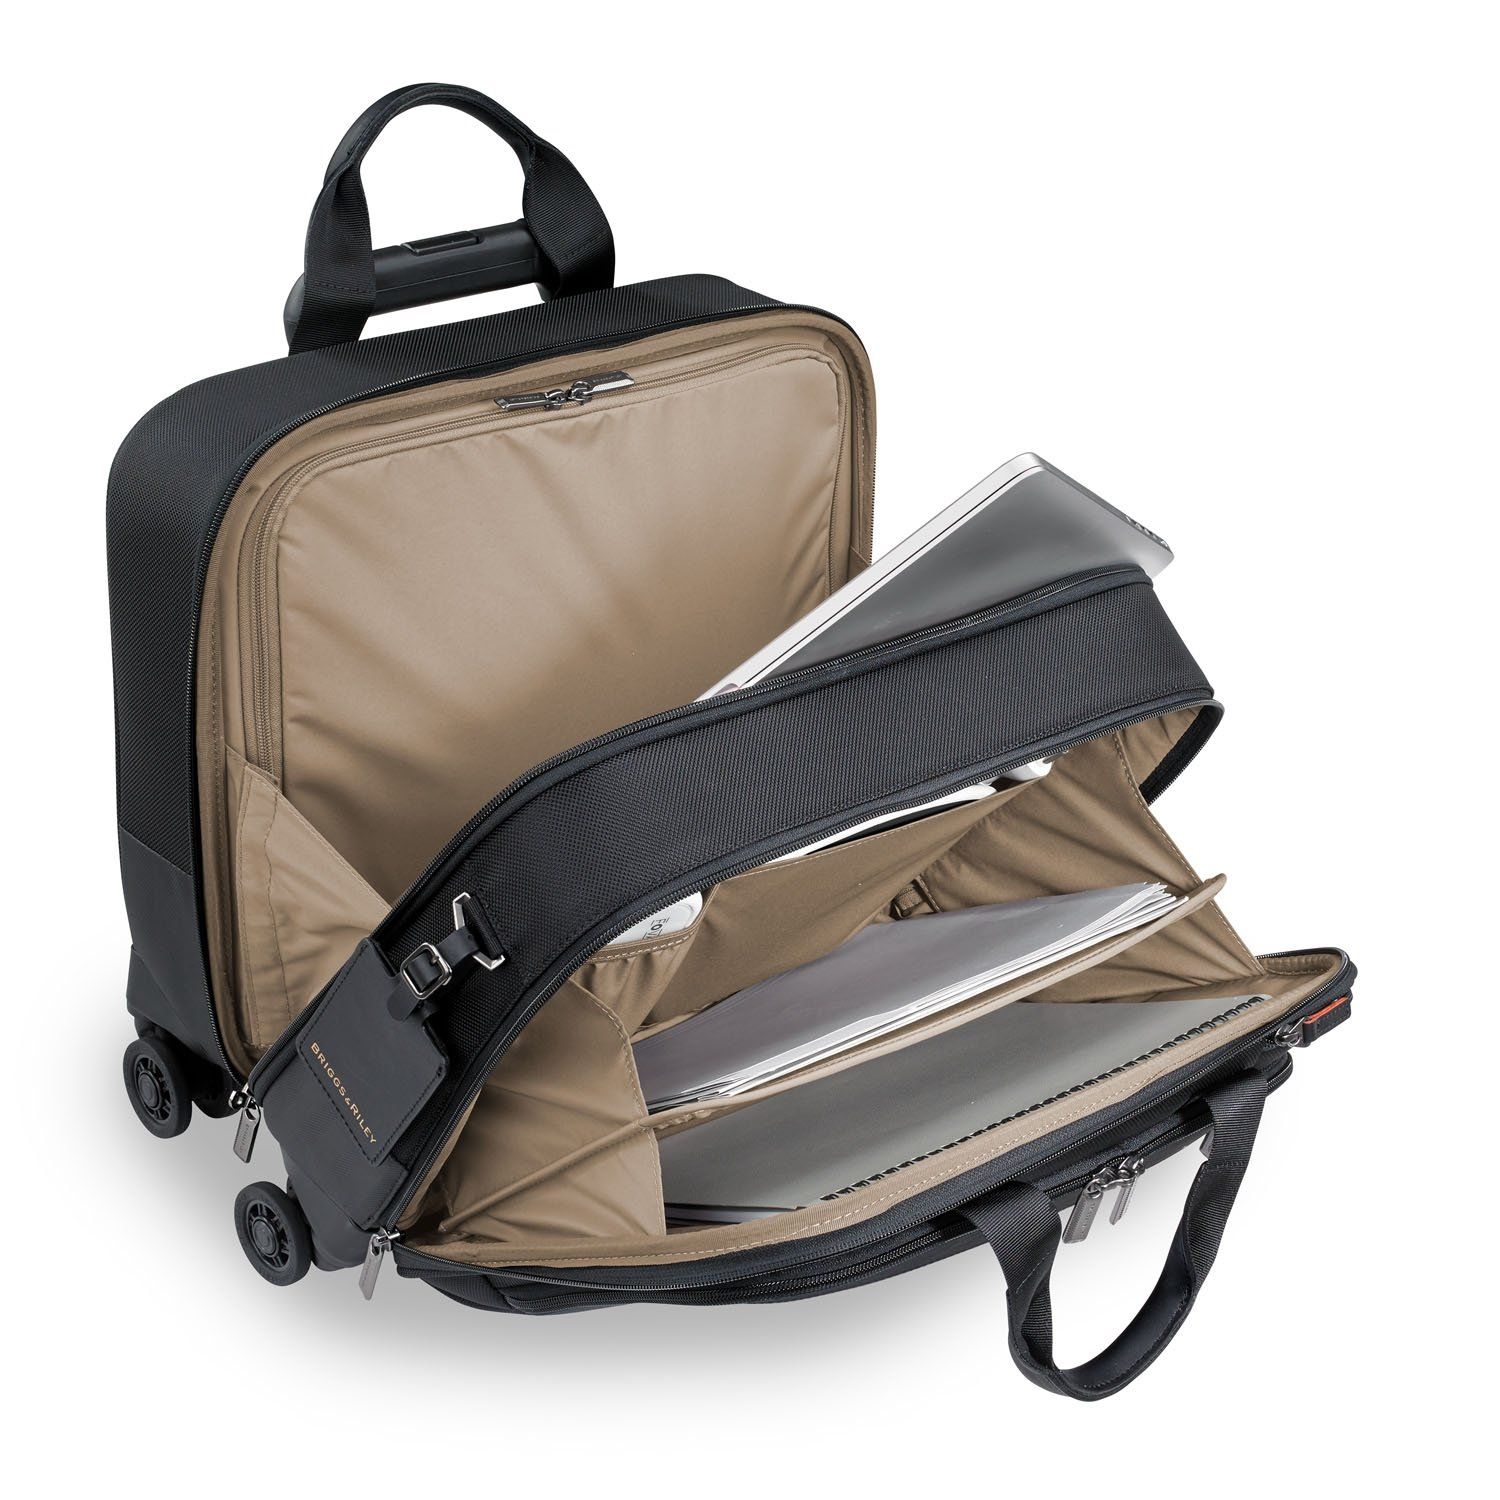 Why carry when you can roll? The @work Medium Spinner Brief effortlessly glides all your business essentials on 4 wheels, so you have 360° of movement for 365 days of productivity. Accommodates most 15.6